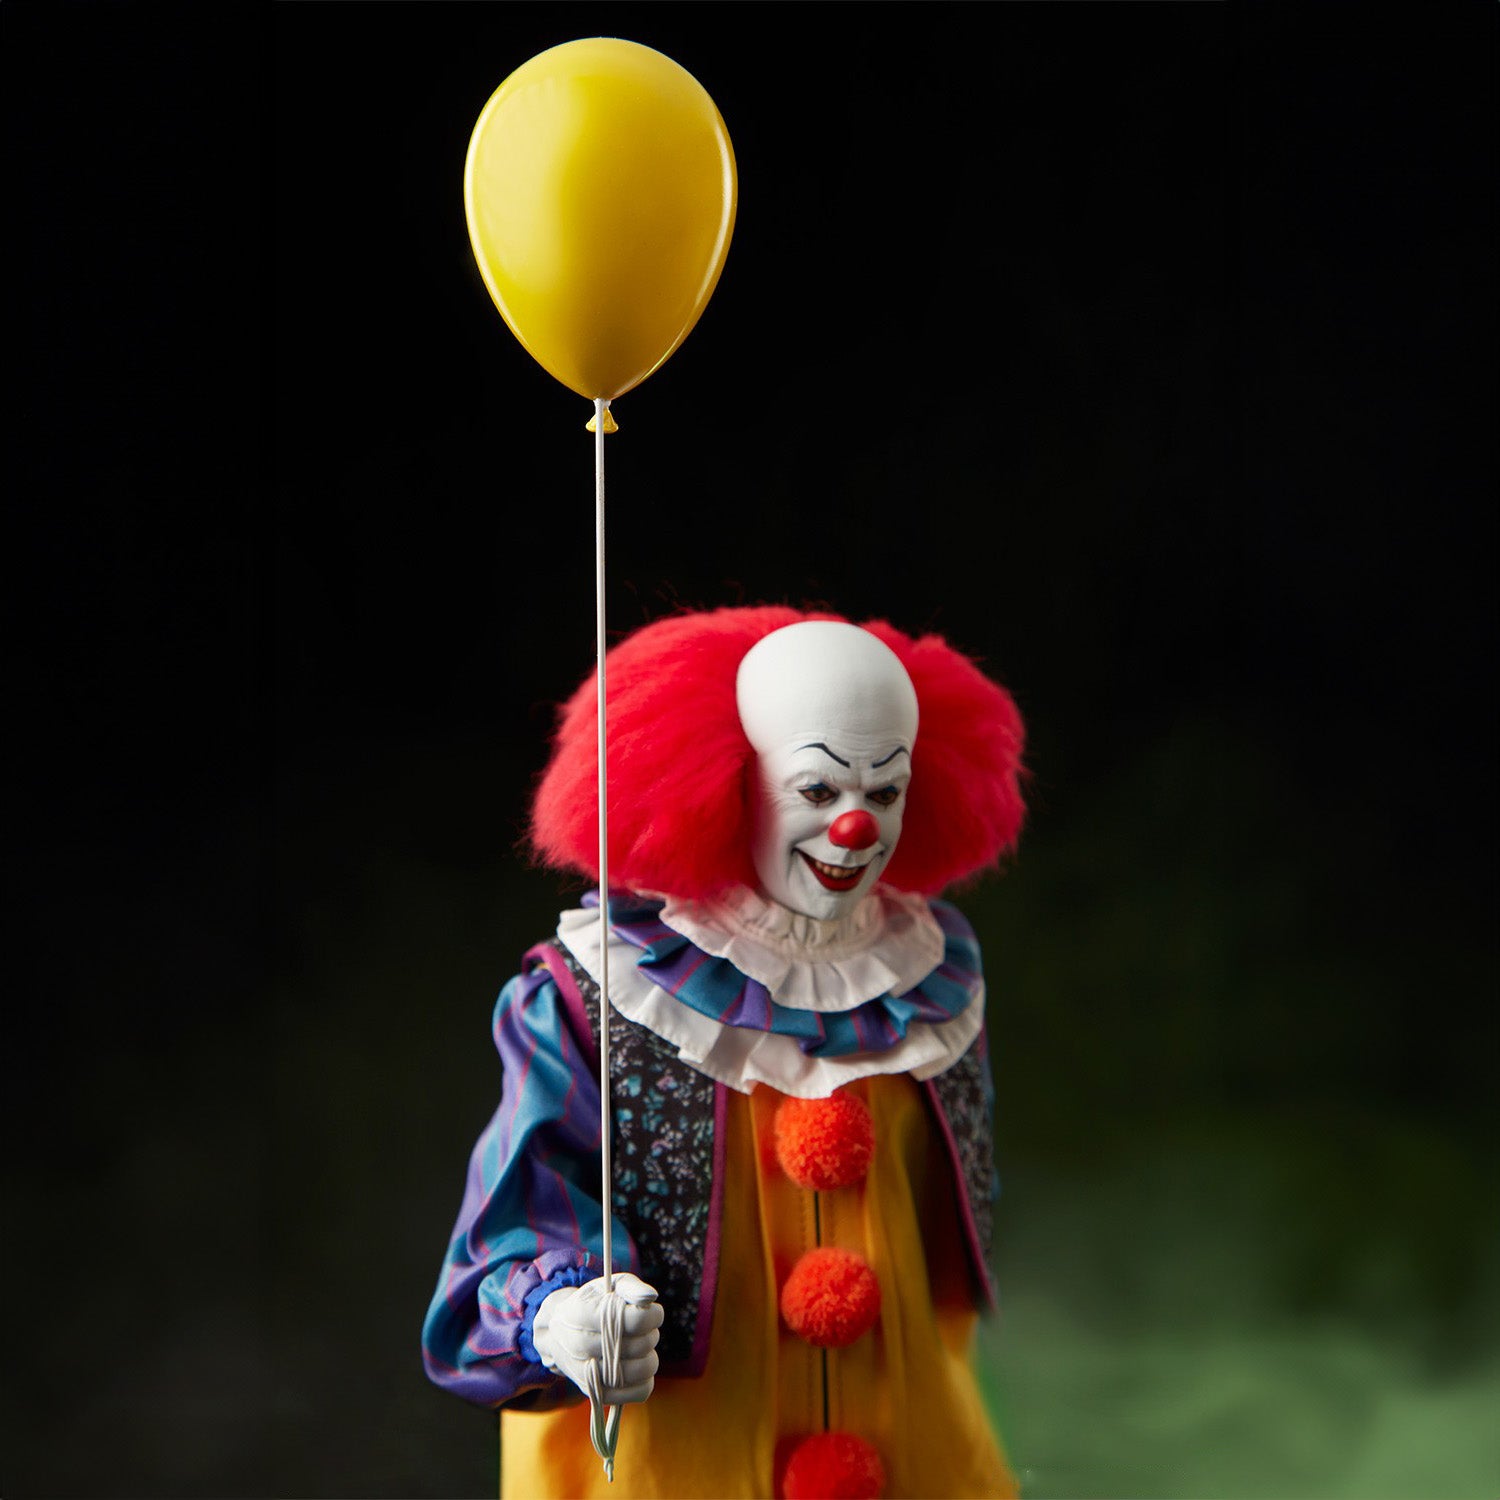 Sideshow Collectibles - Sixth Scale Figure - It (1990) - Pennywise - Marvelous Toys